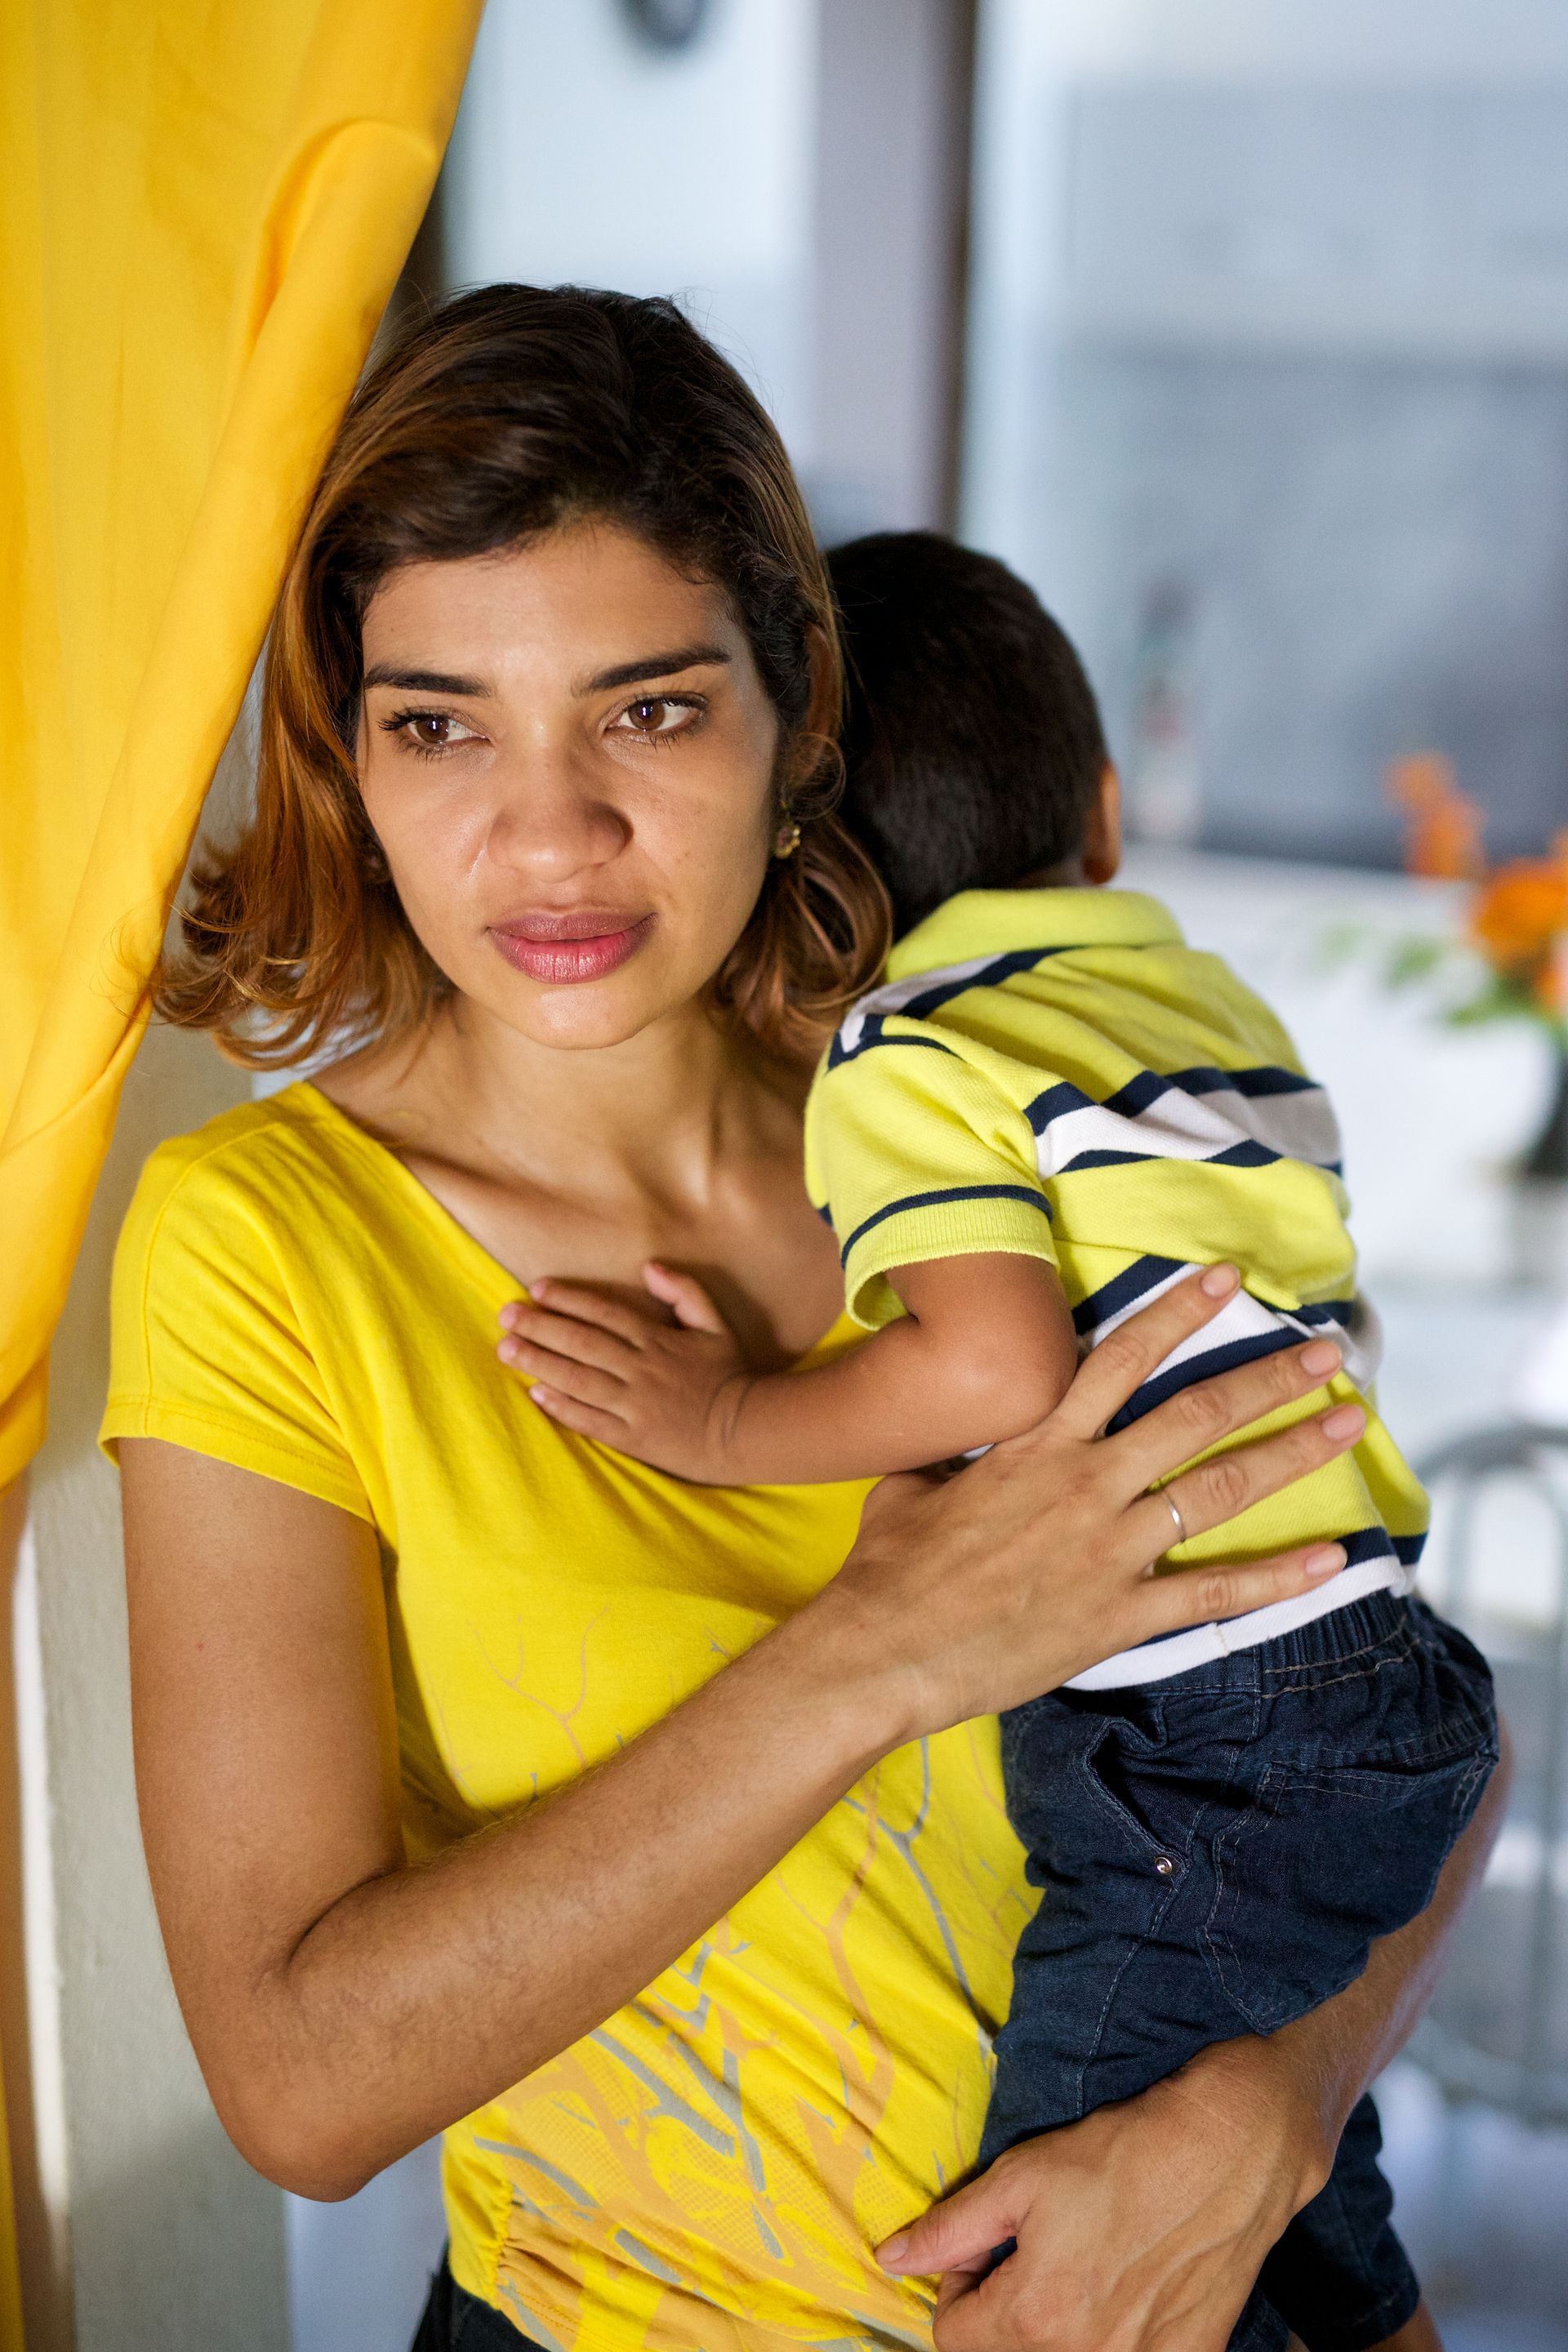 A woman holds her infant son, whose face is turned away.